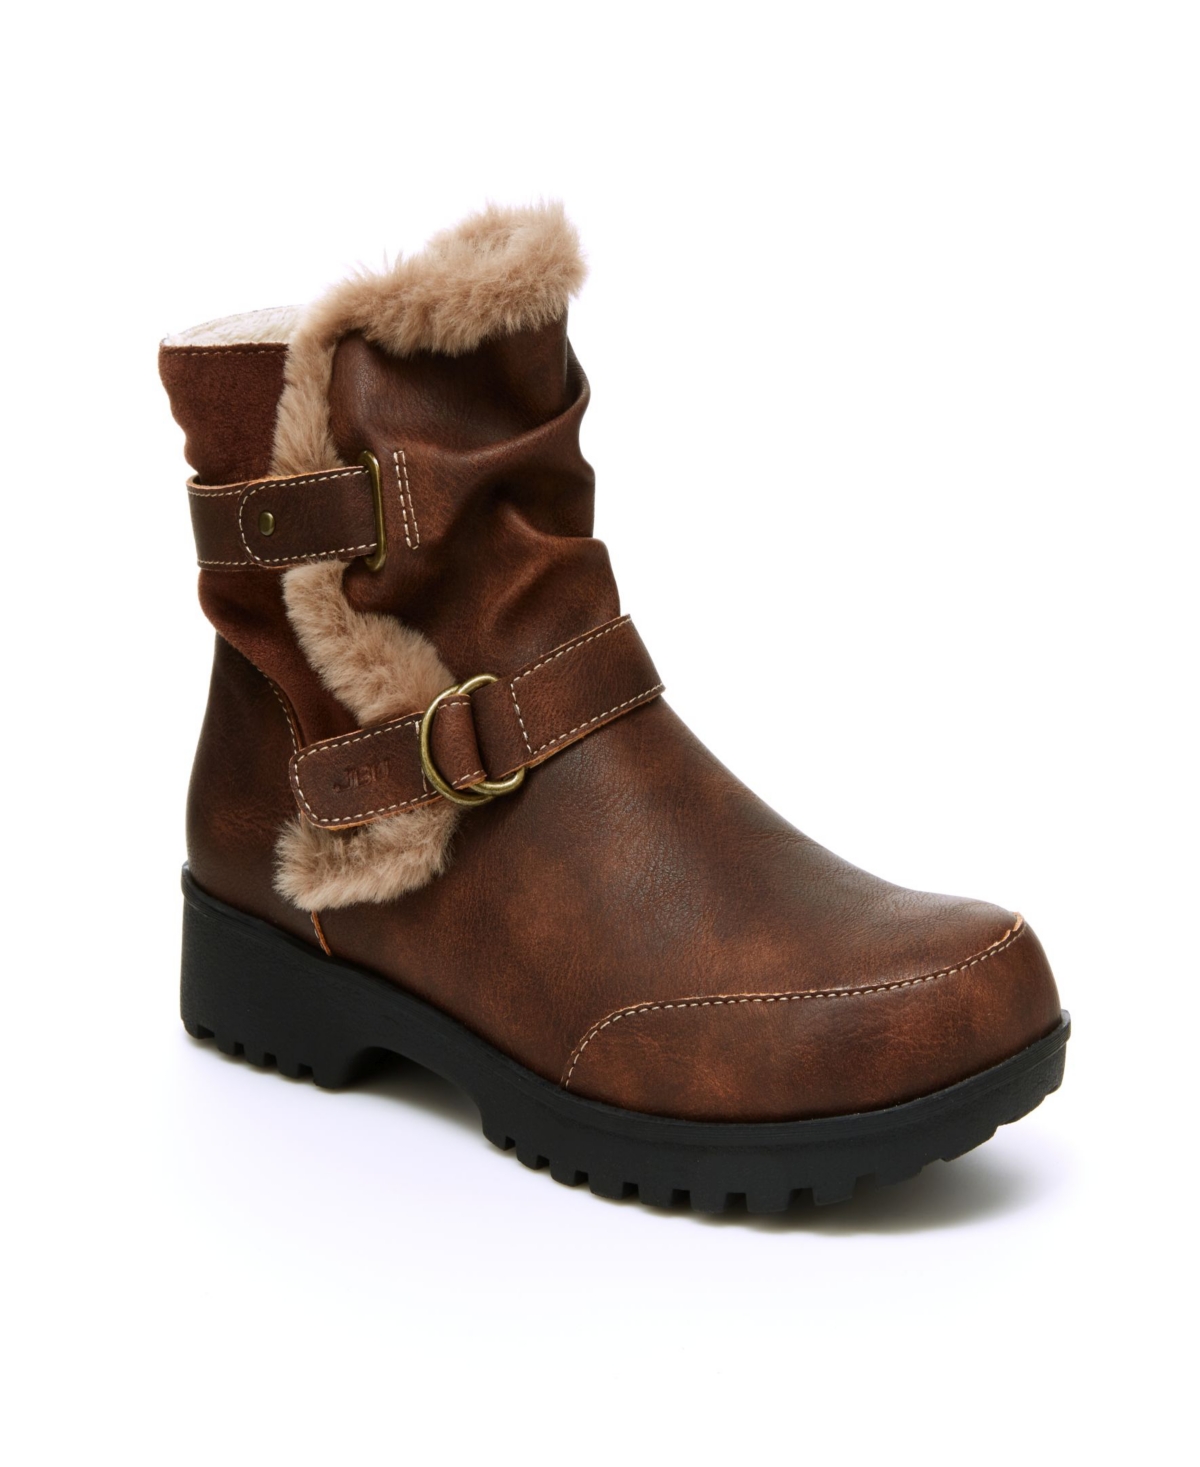 Indiana Water-resistant Ankle Boot - Brown